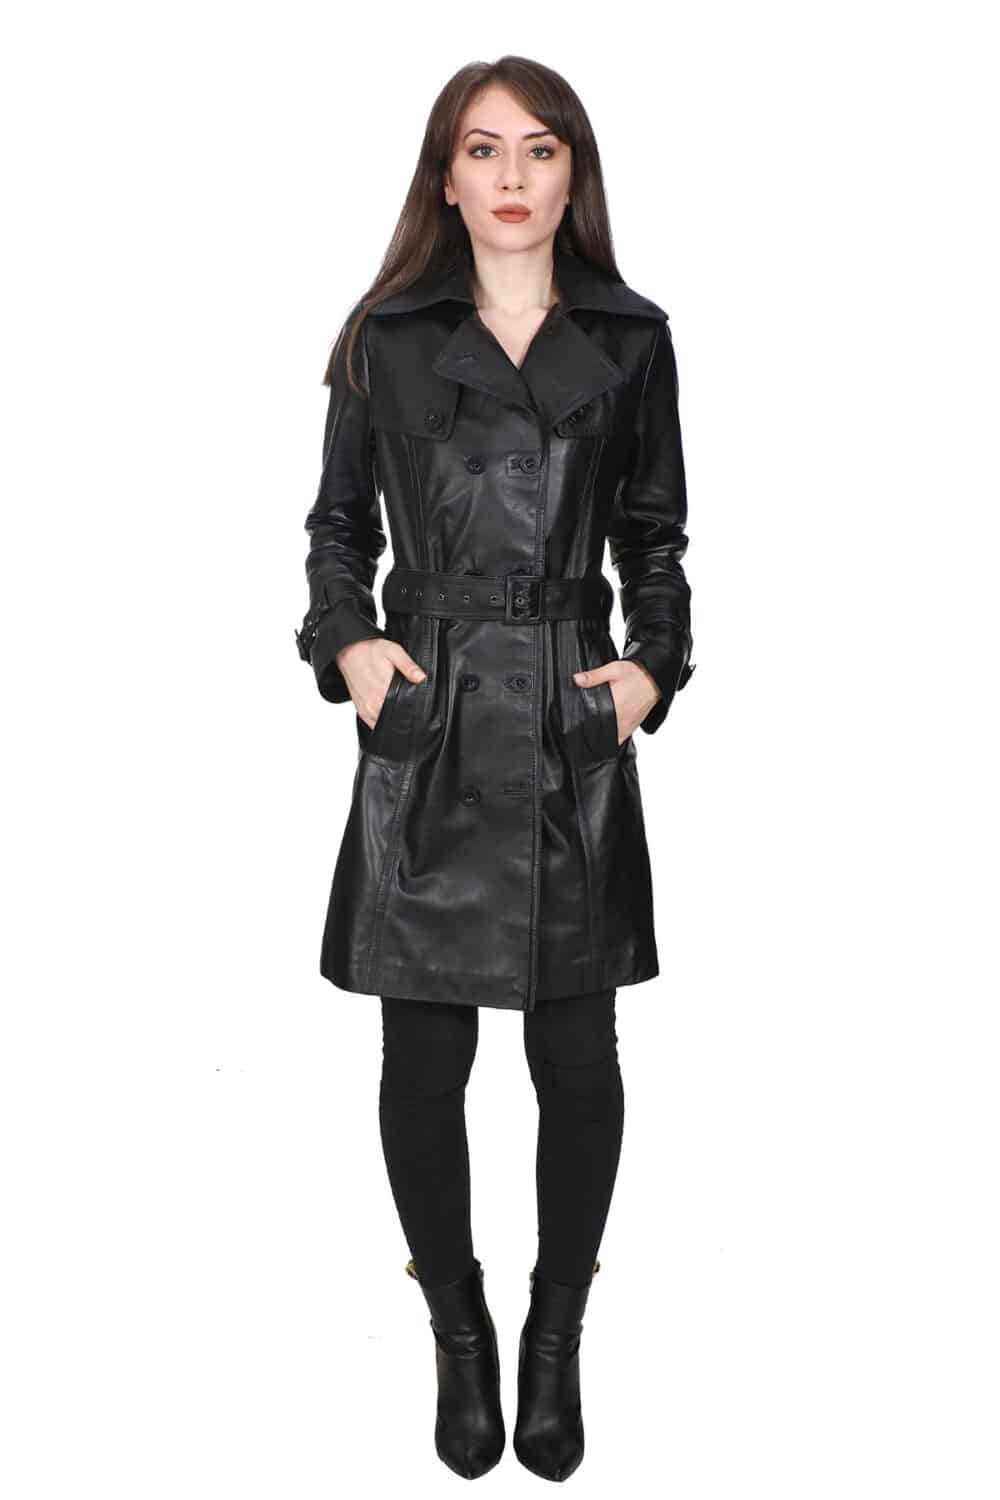 Ed Westwick Leather Trench Coat : LeatherCult: Genuine Custom Leather  Products, Jackets for Men & Women